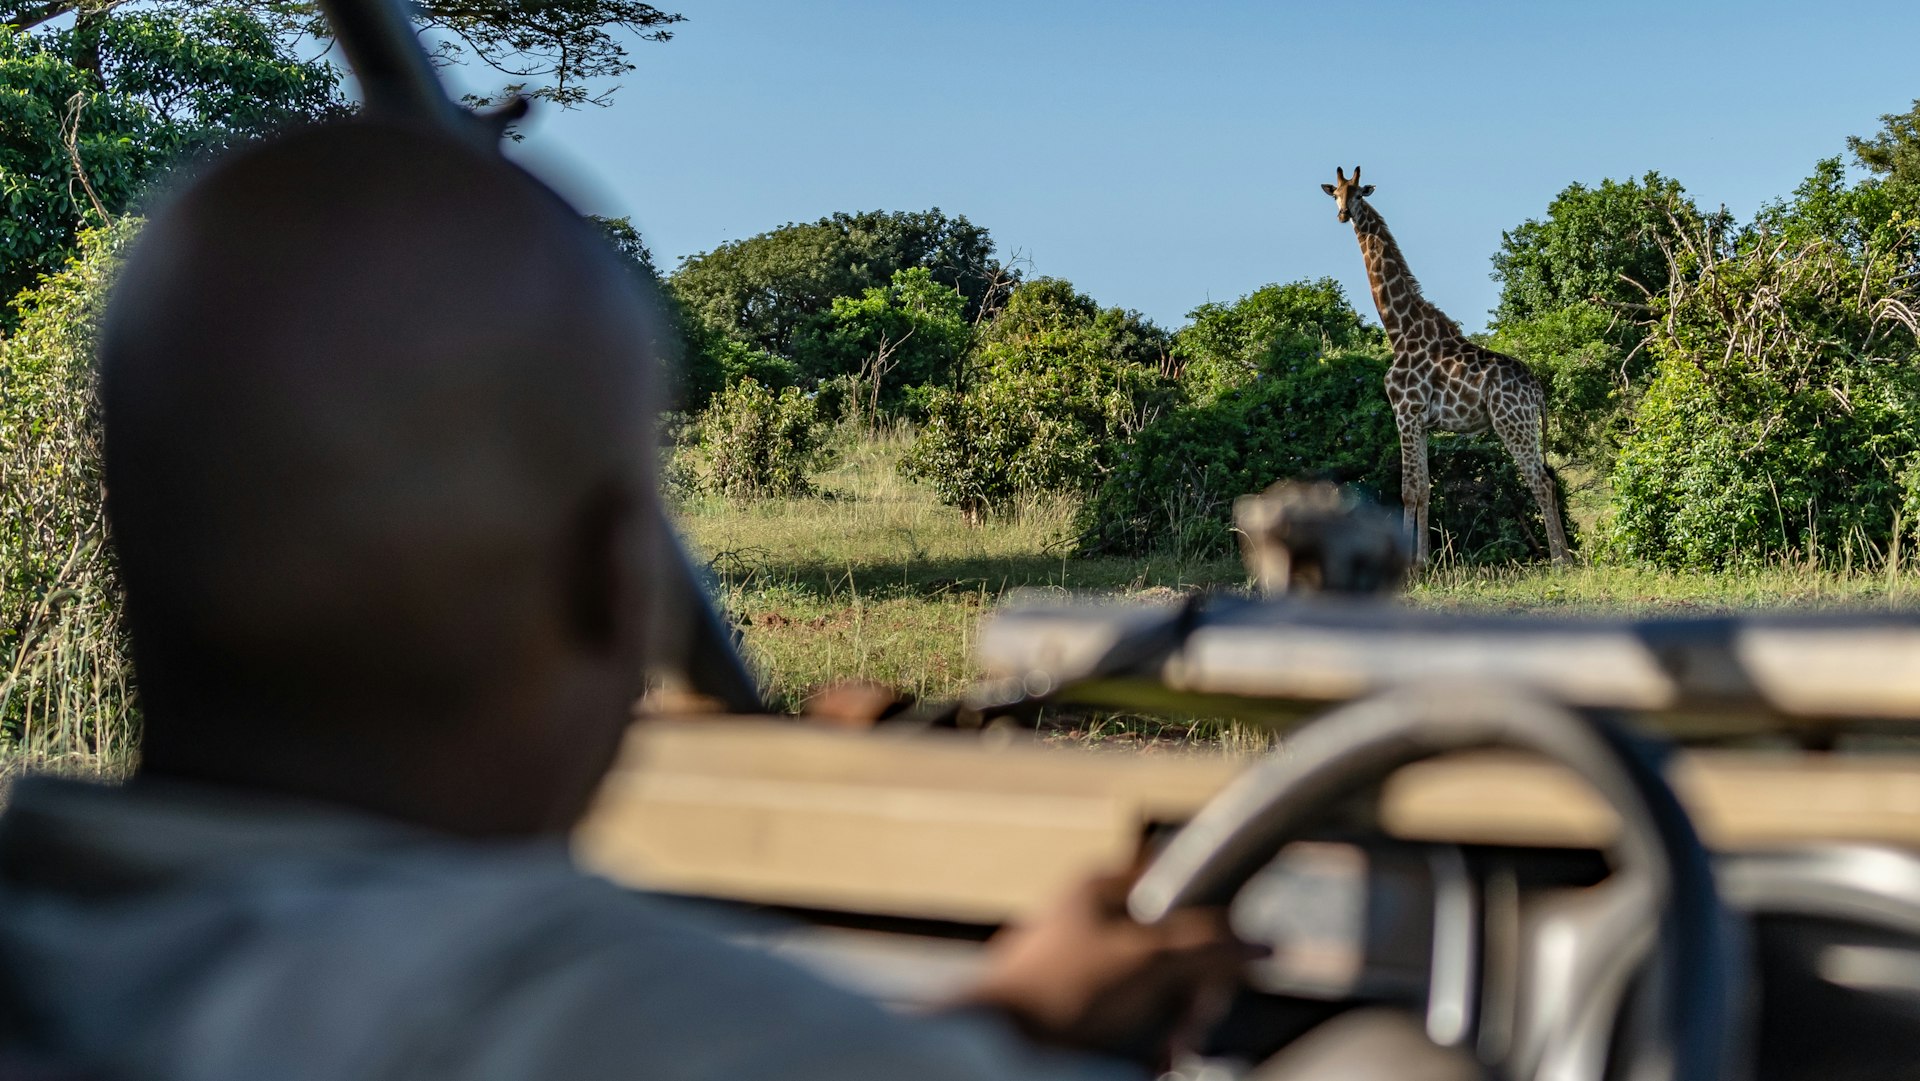 A driver sits at the wheel of a vehicle gazing out at a giraffe on a self-drive safari